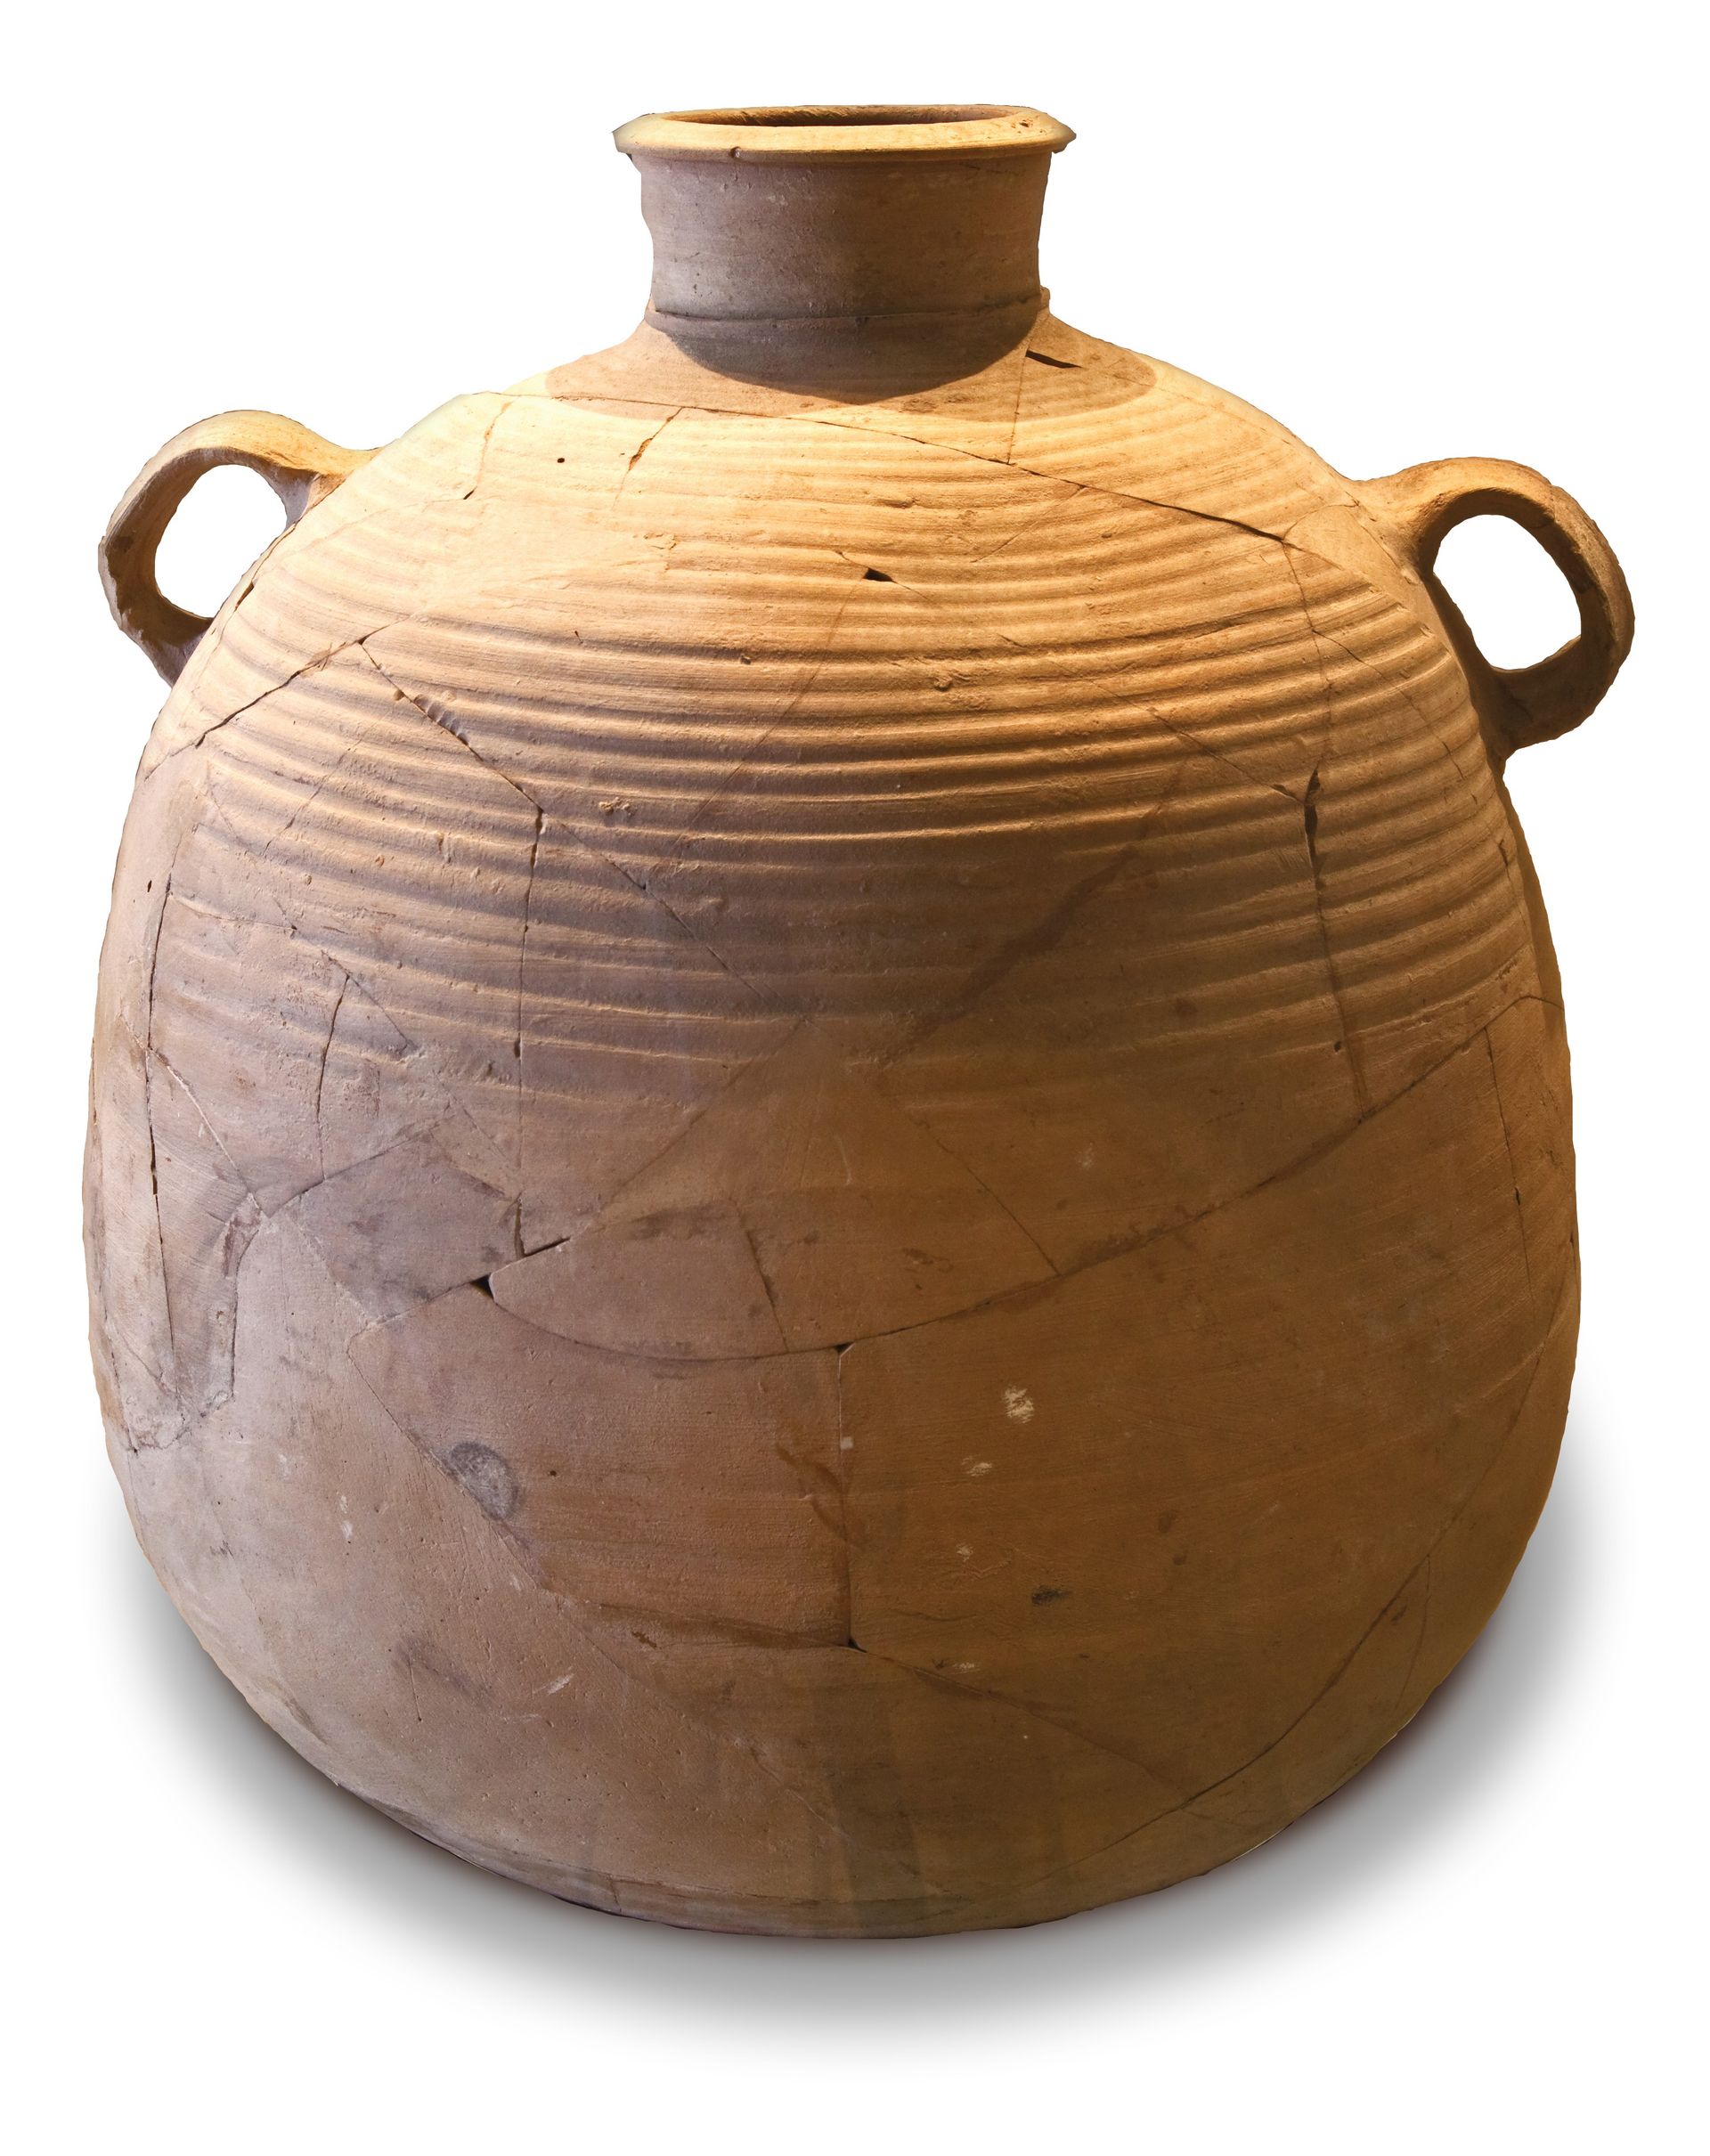 A two-handled clay pot with a narrow opening.